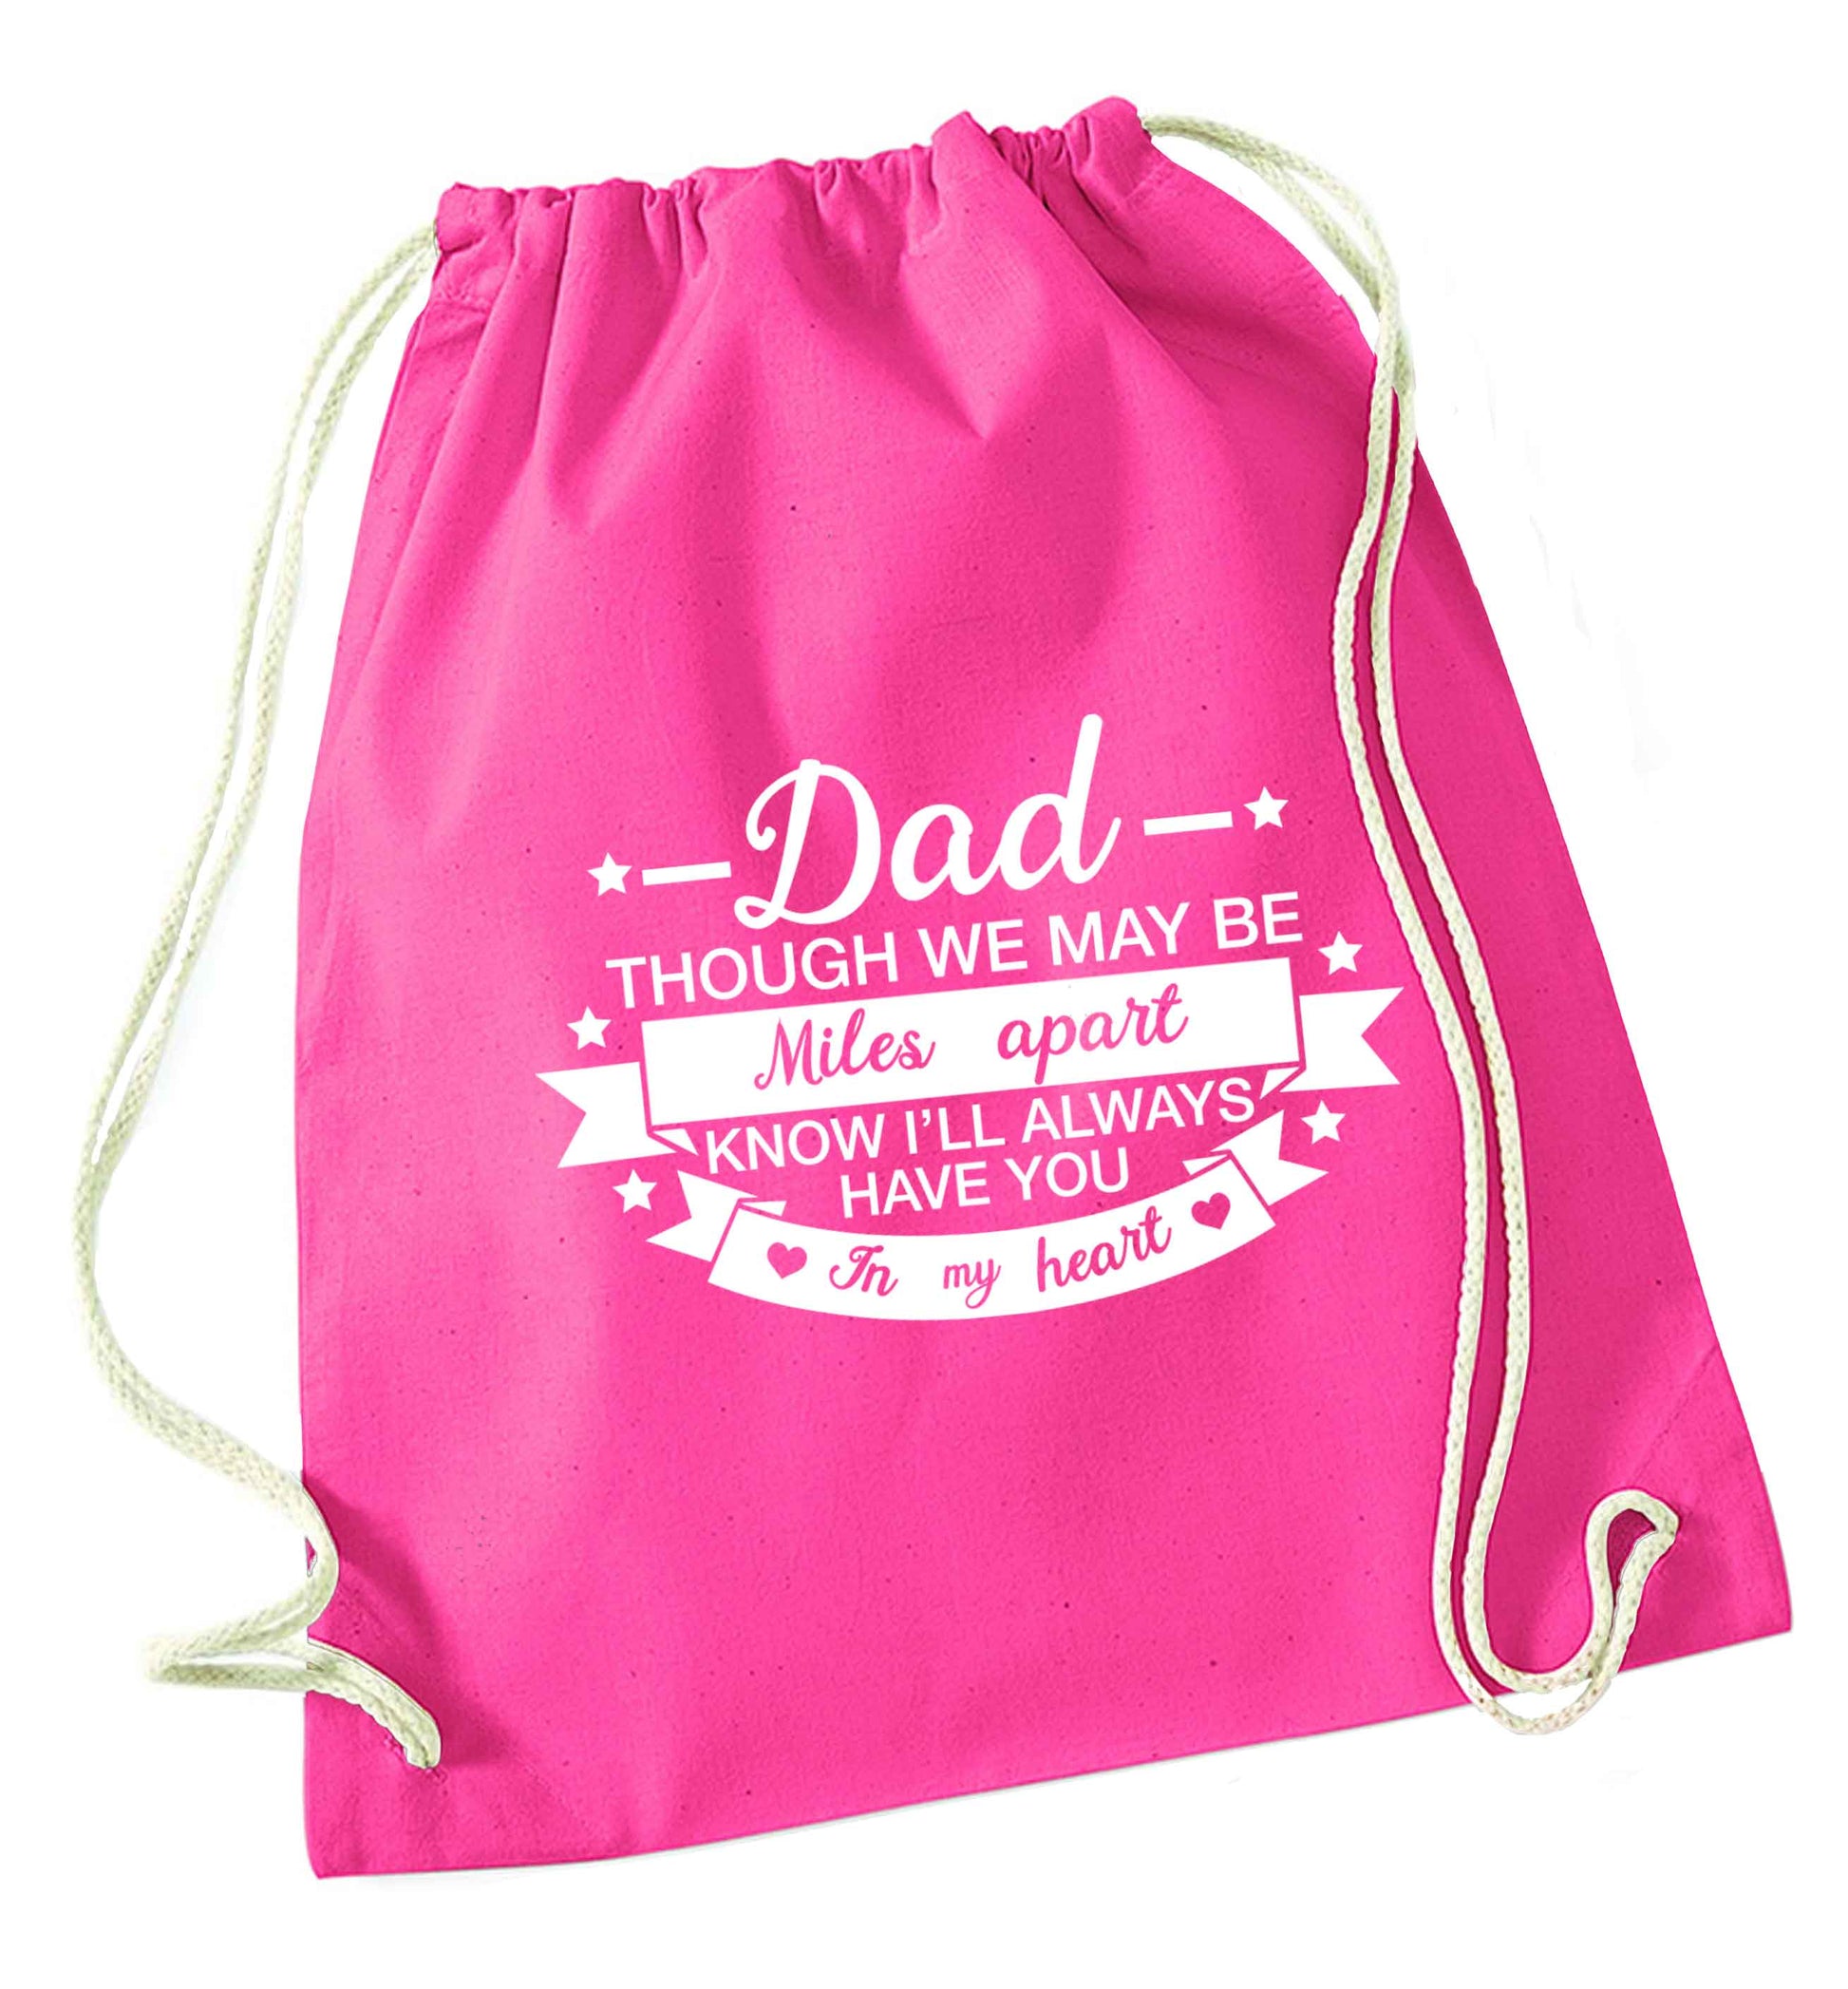 Dad though we are miles apart know I'll always have you in my heart pink drawstring bag